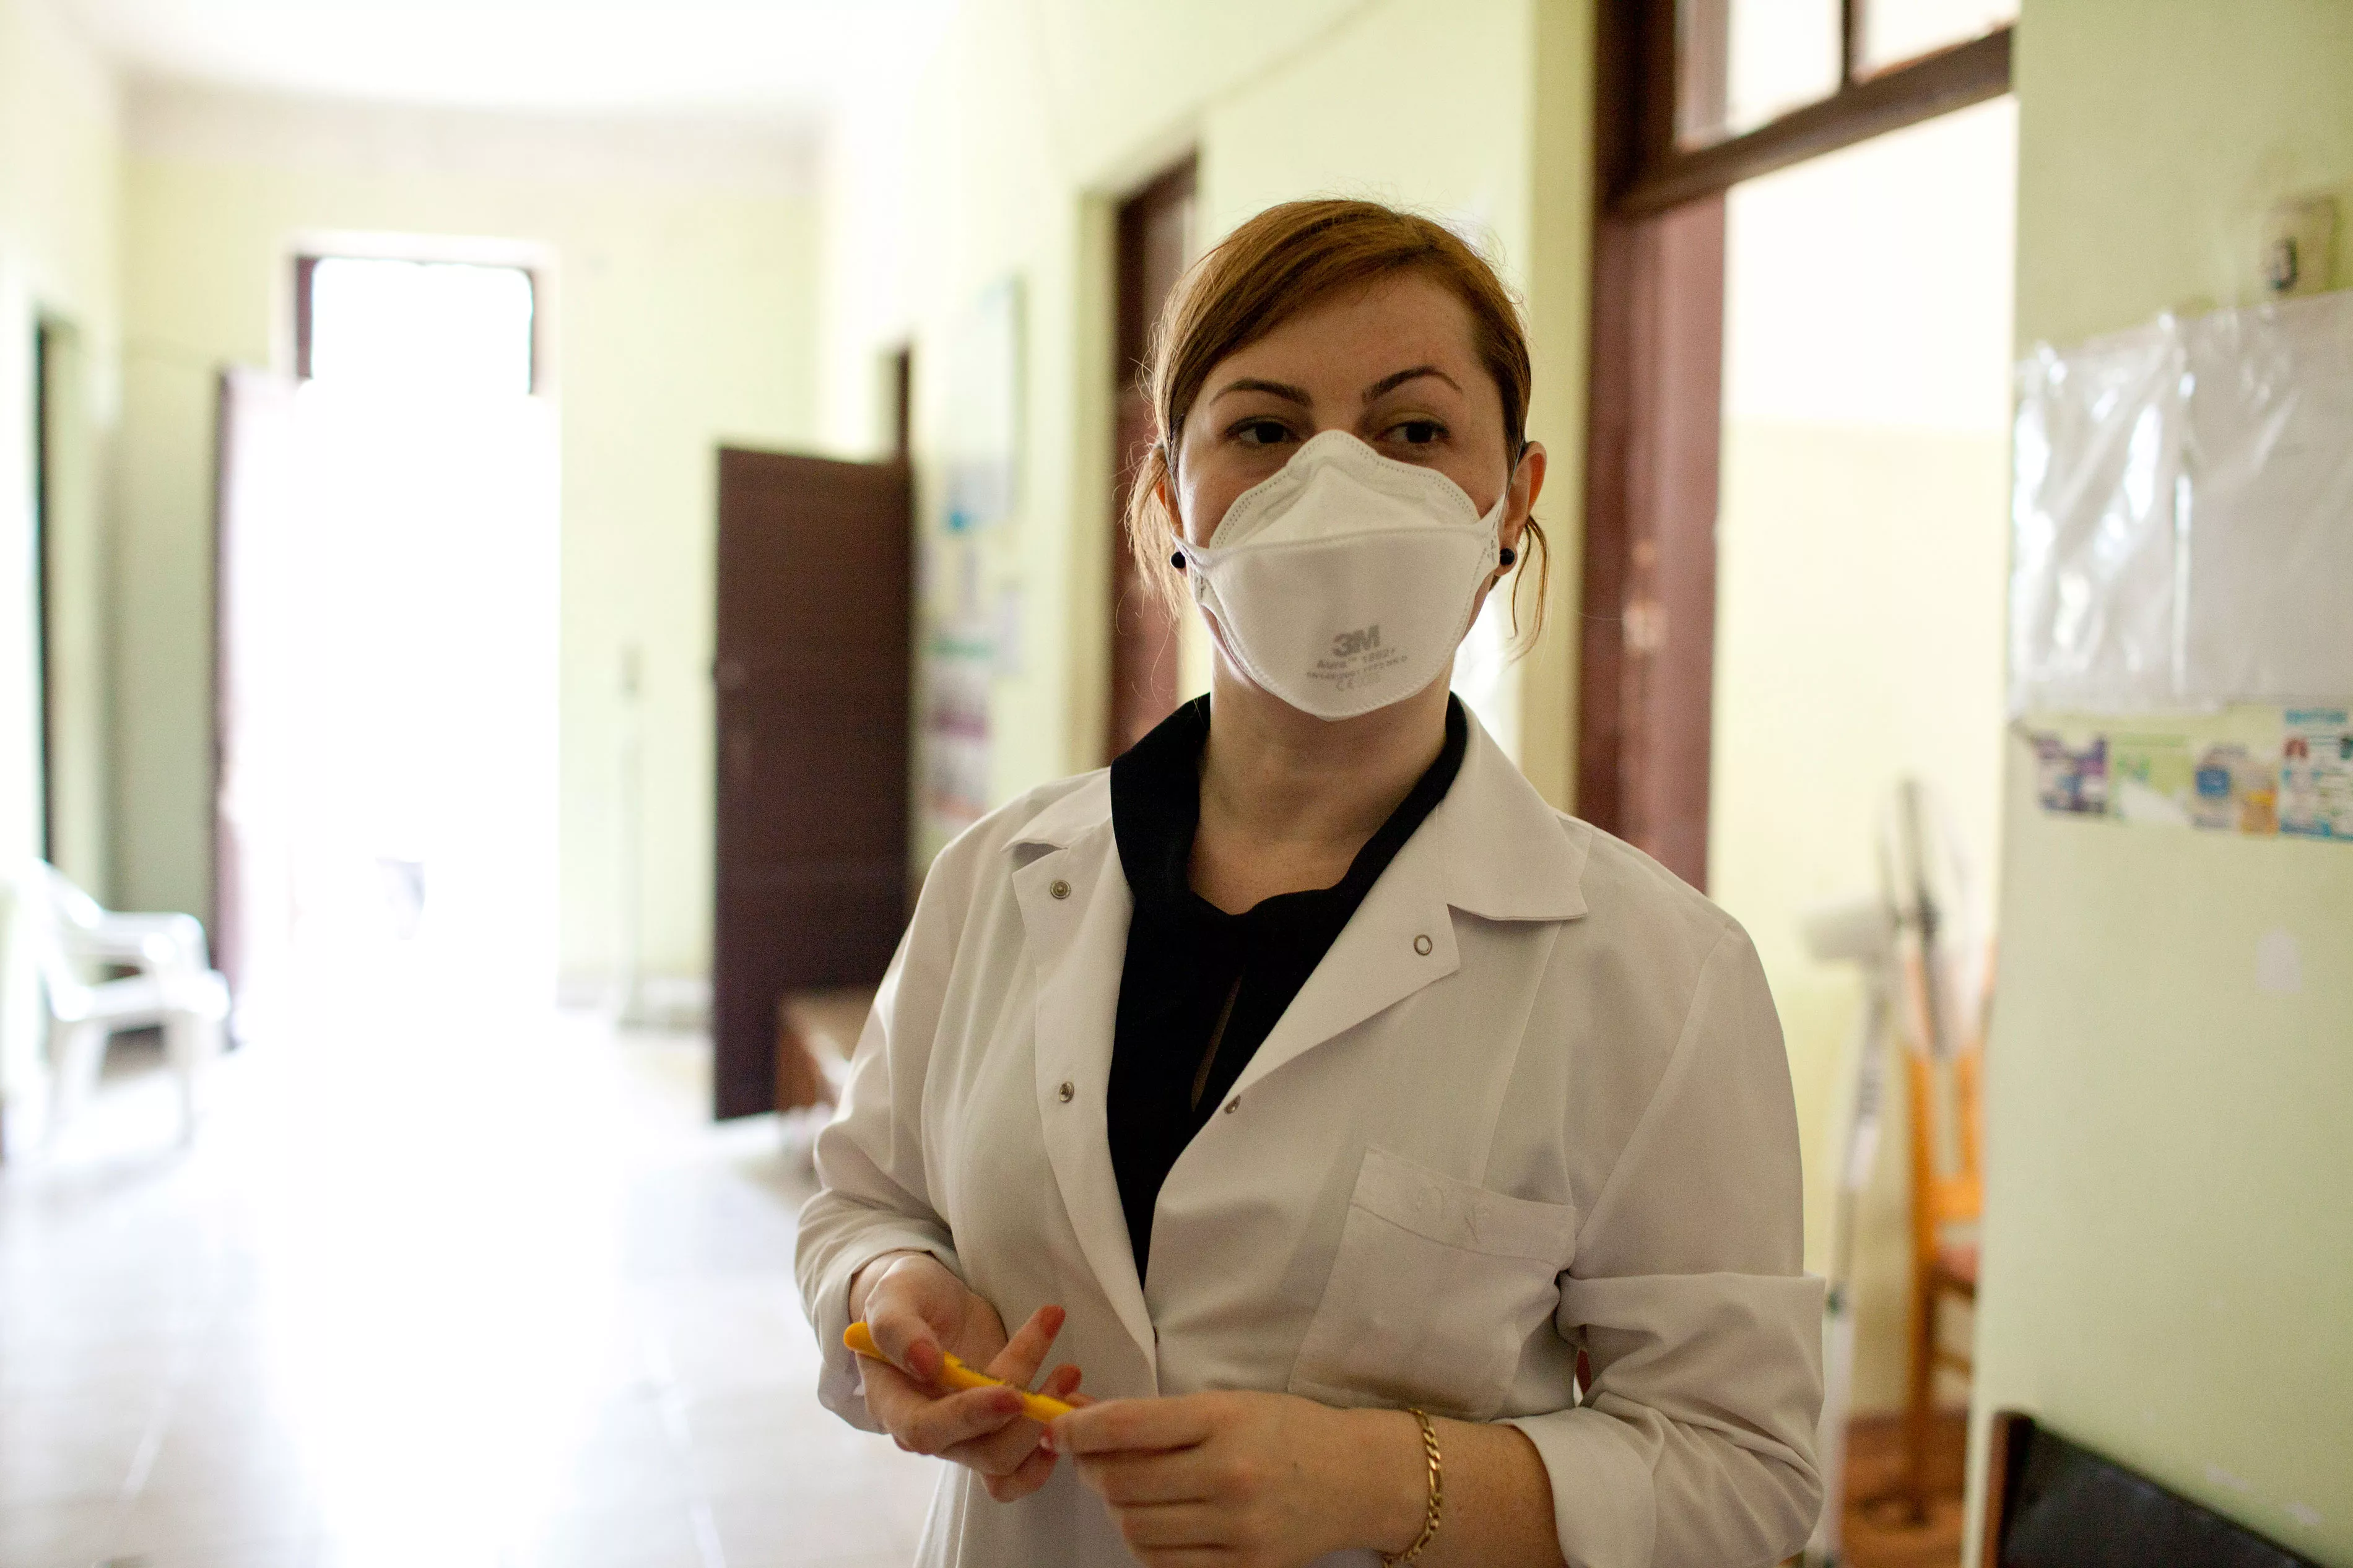 TB doctor Irma Davitadze at work at the Regional Center of Infectious Pathology, AIDS and Tuberculosis in Batumi, a beach resort town on the Black Sea. MSF has worked here since 2014.